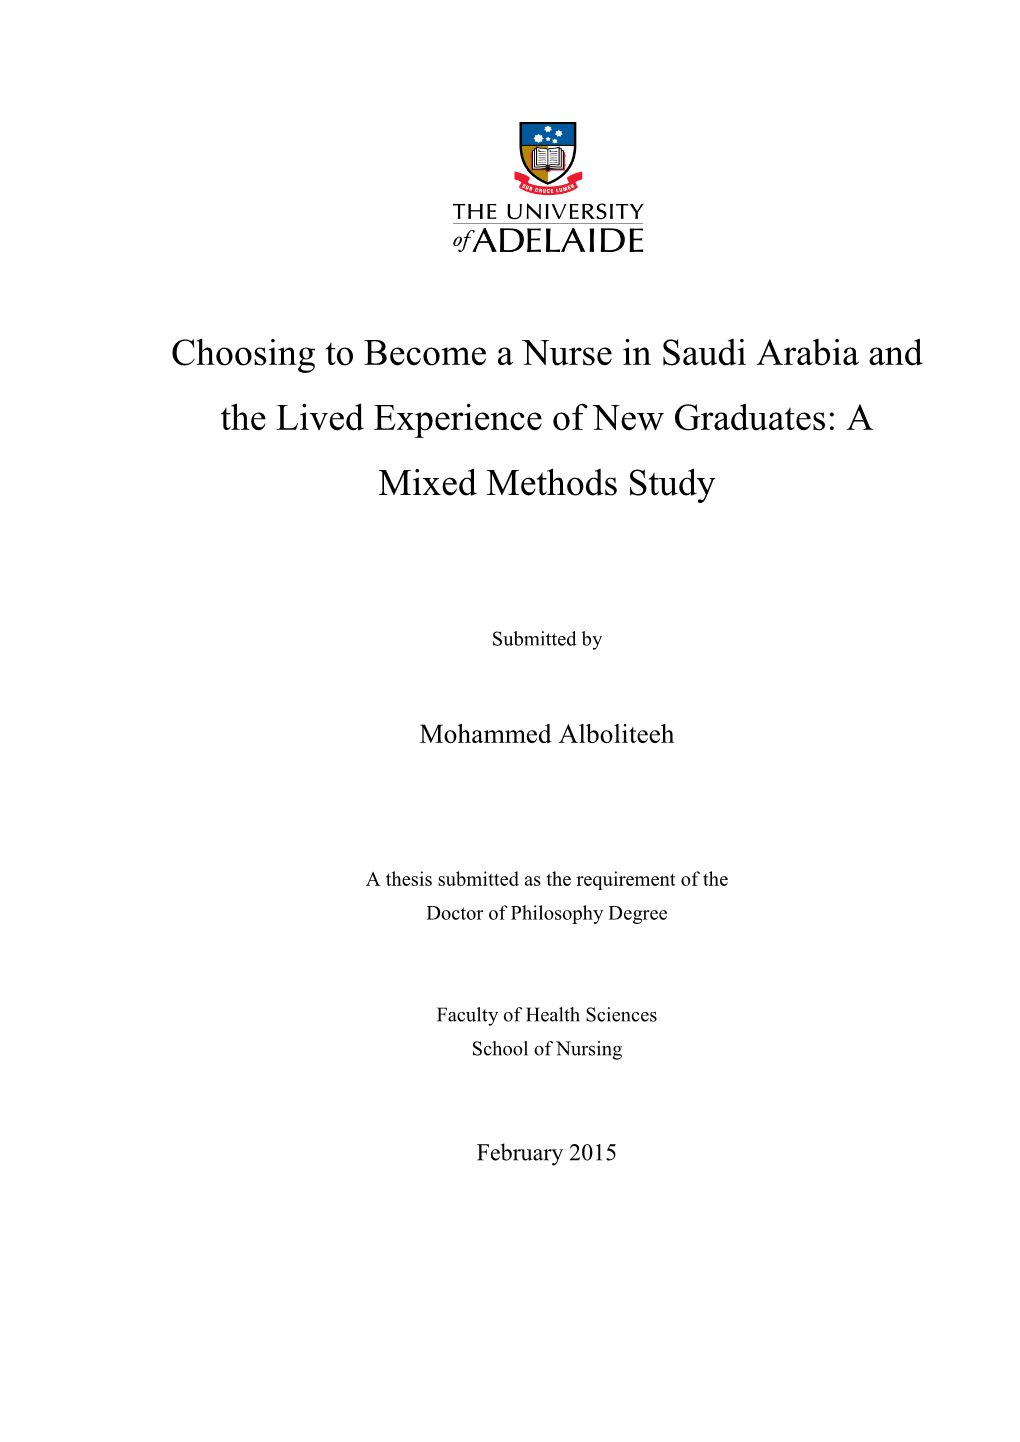 Choosing to Become a Nurse in Saudi Arabia and the Lived Experience of New Graduates: a Mixed Methods Study